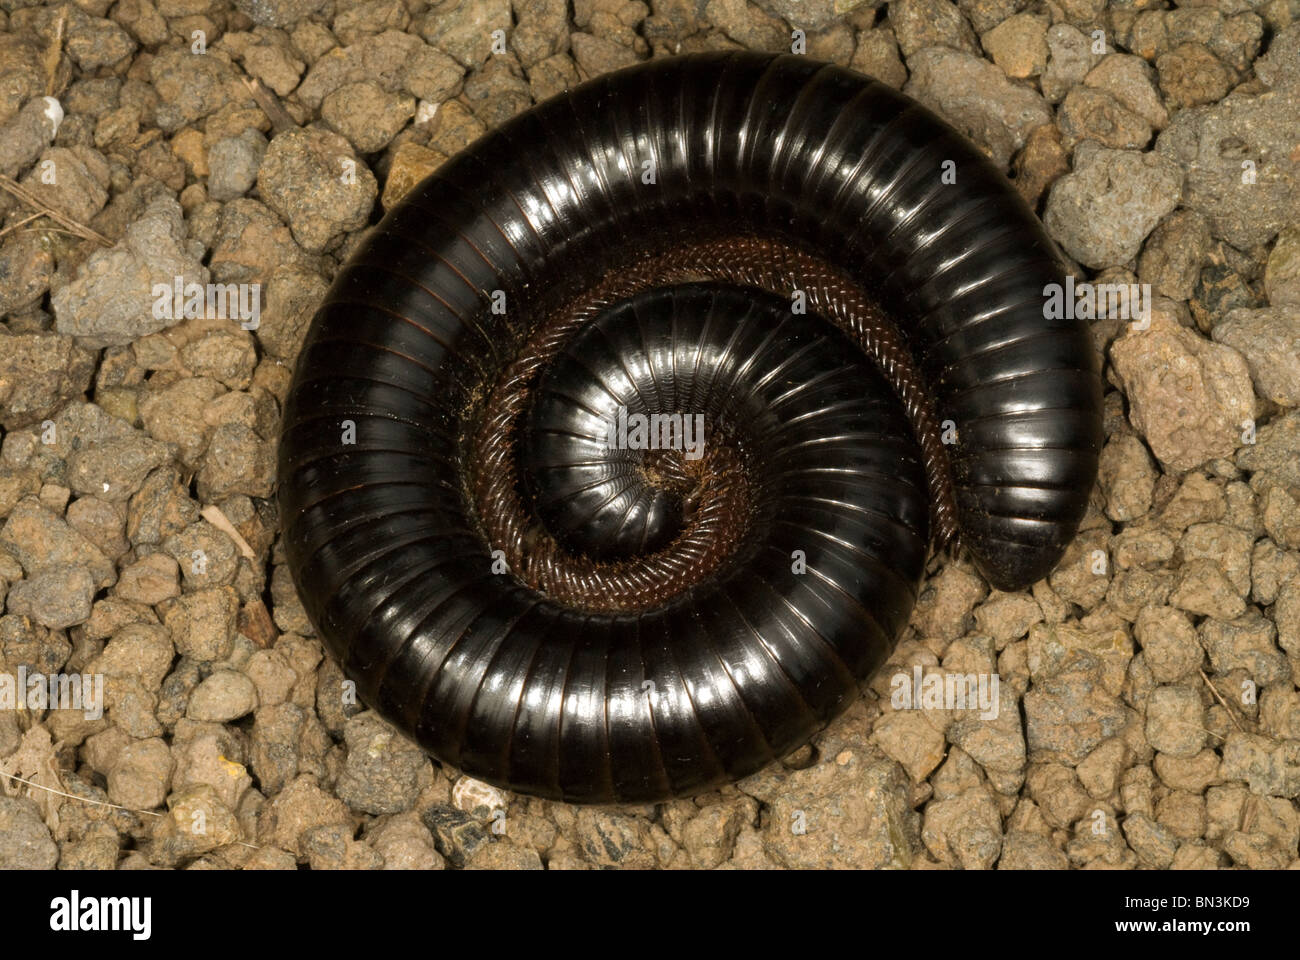 Close up of African giant millipede (Archispirostreptus gigas) Stock Photo